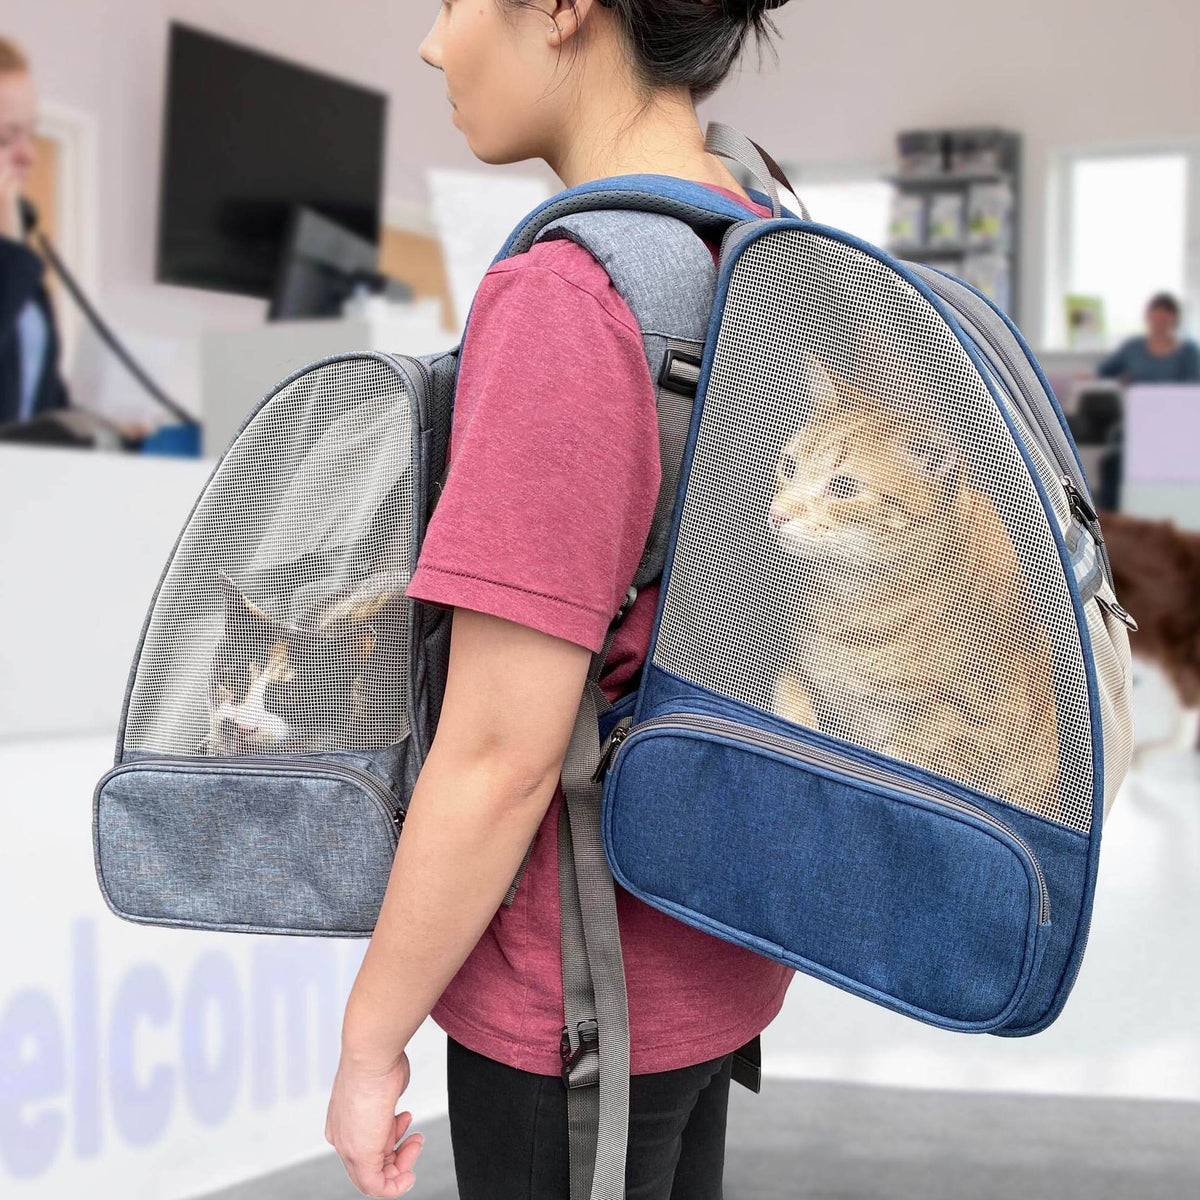 Cat owner wearing two backpacks containing cats, one on front, one on back, in vet clinic